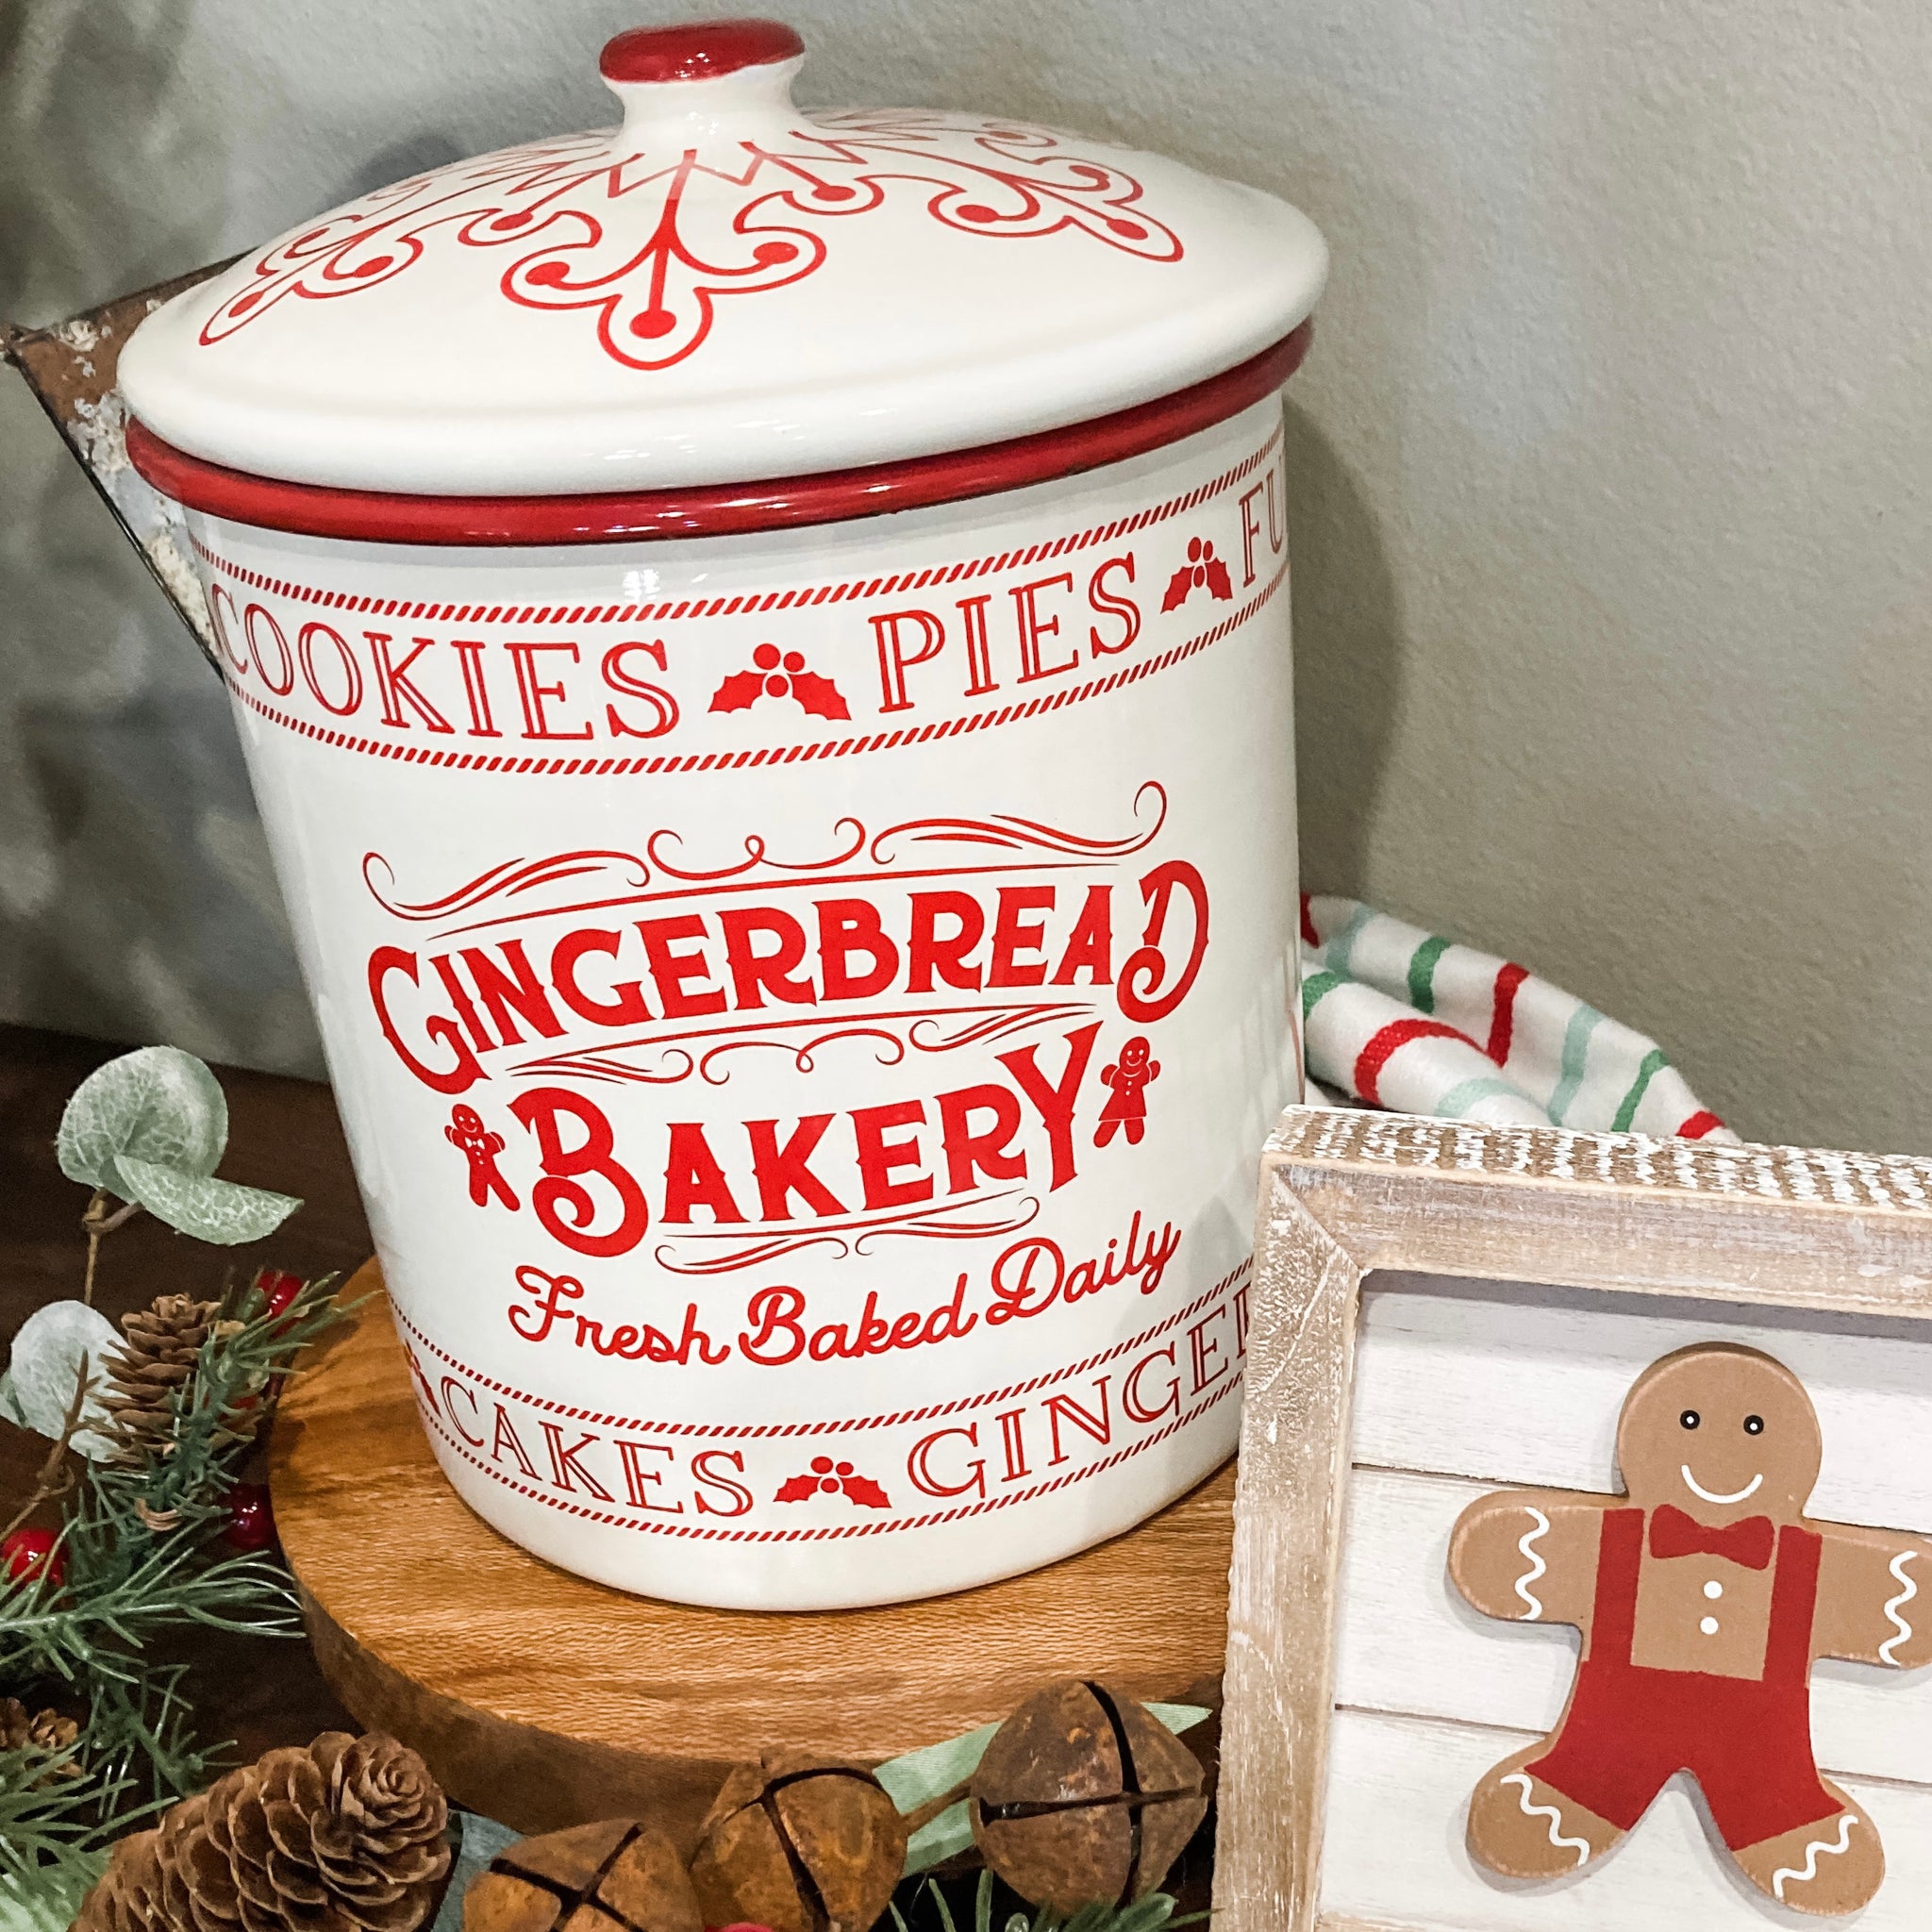 Gingerbread Bakery Enameled Container